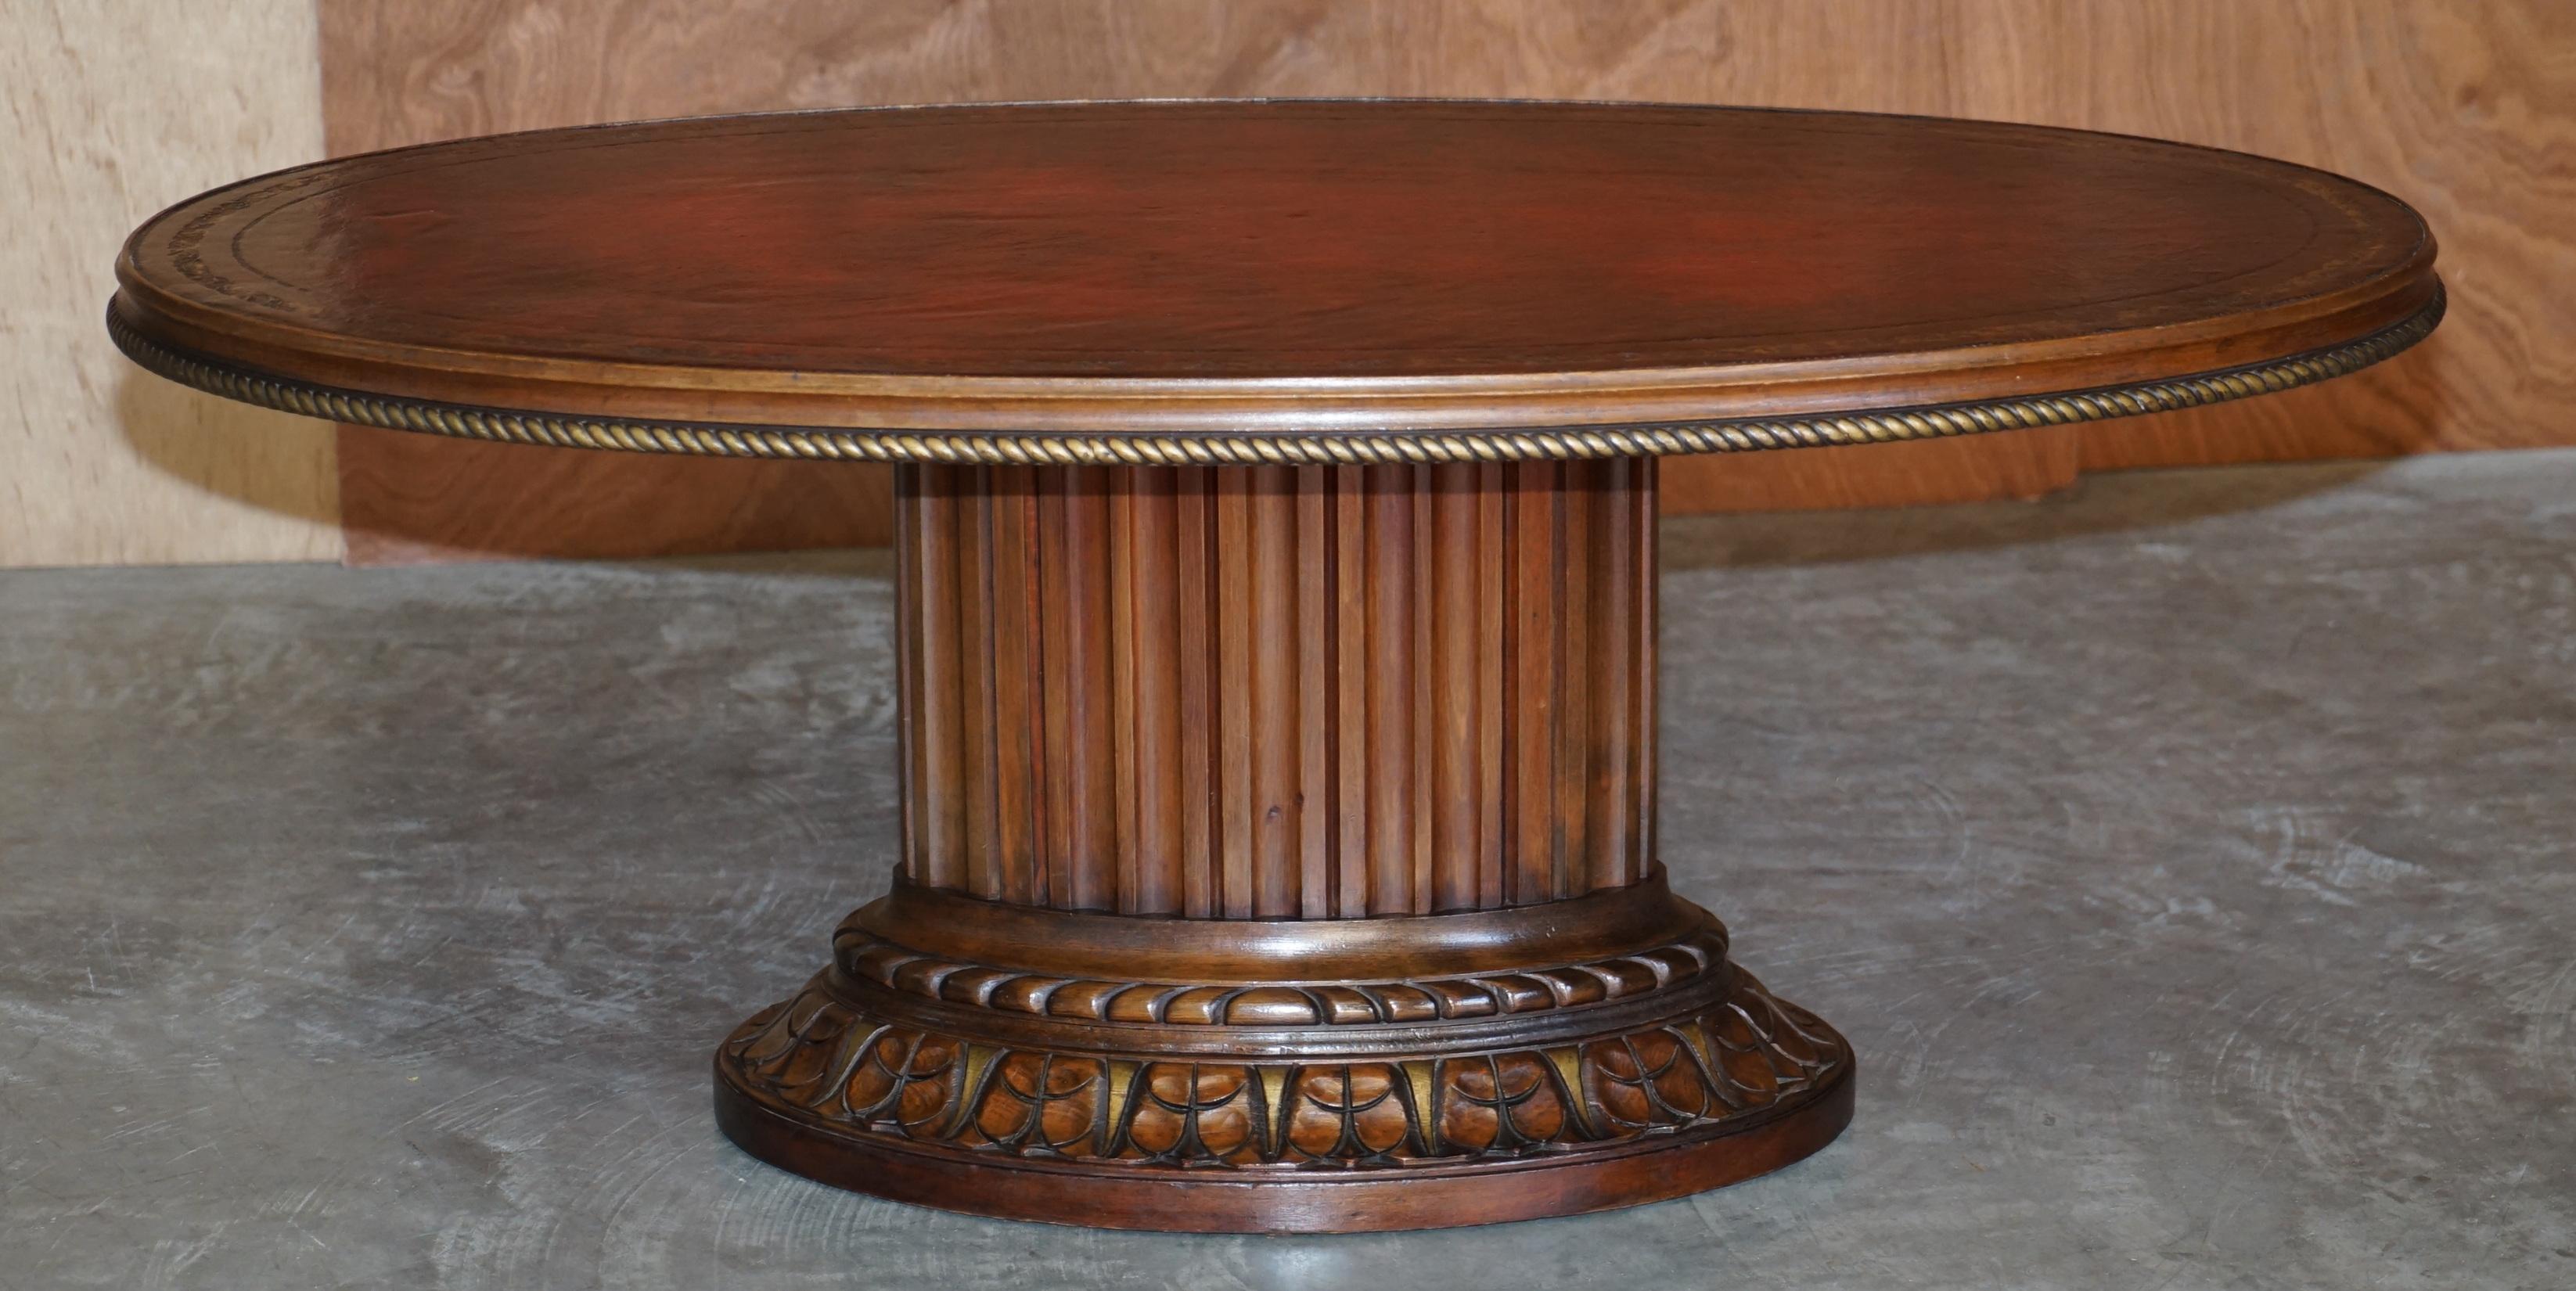 Oxblood Leather Oval Roman Pedestal Base Coffee or Cocktail Table Nice Find 7